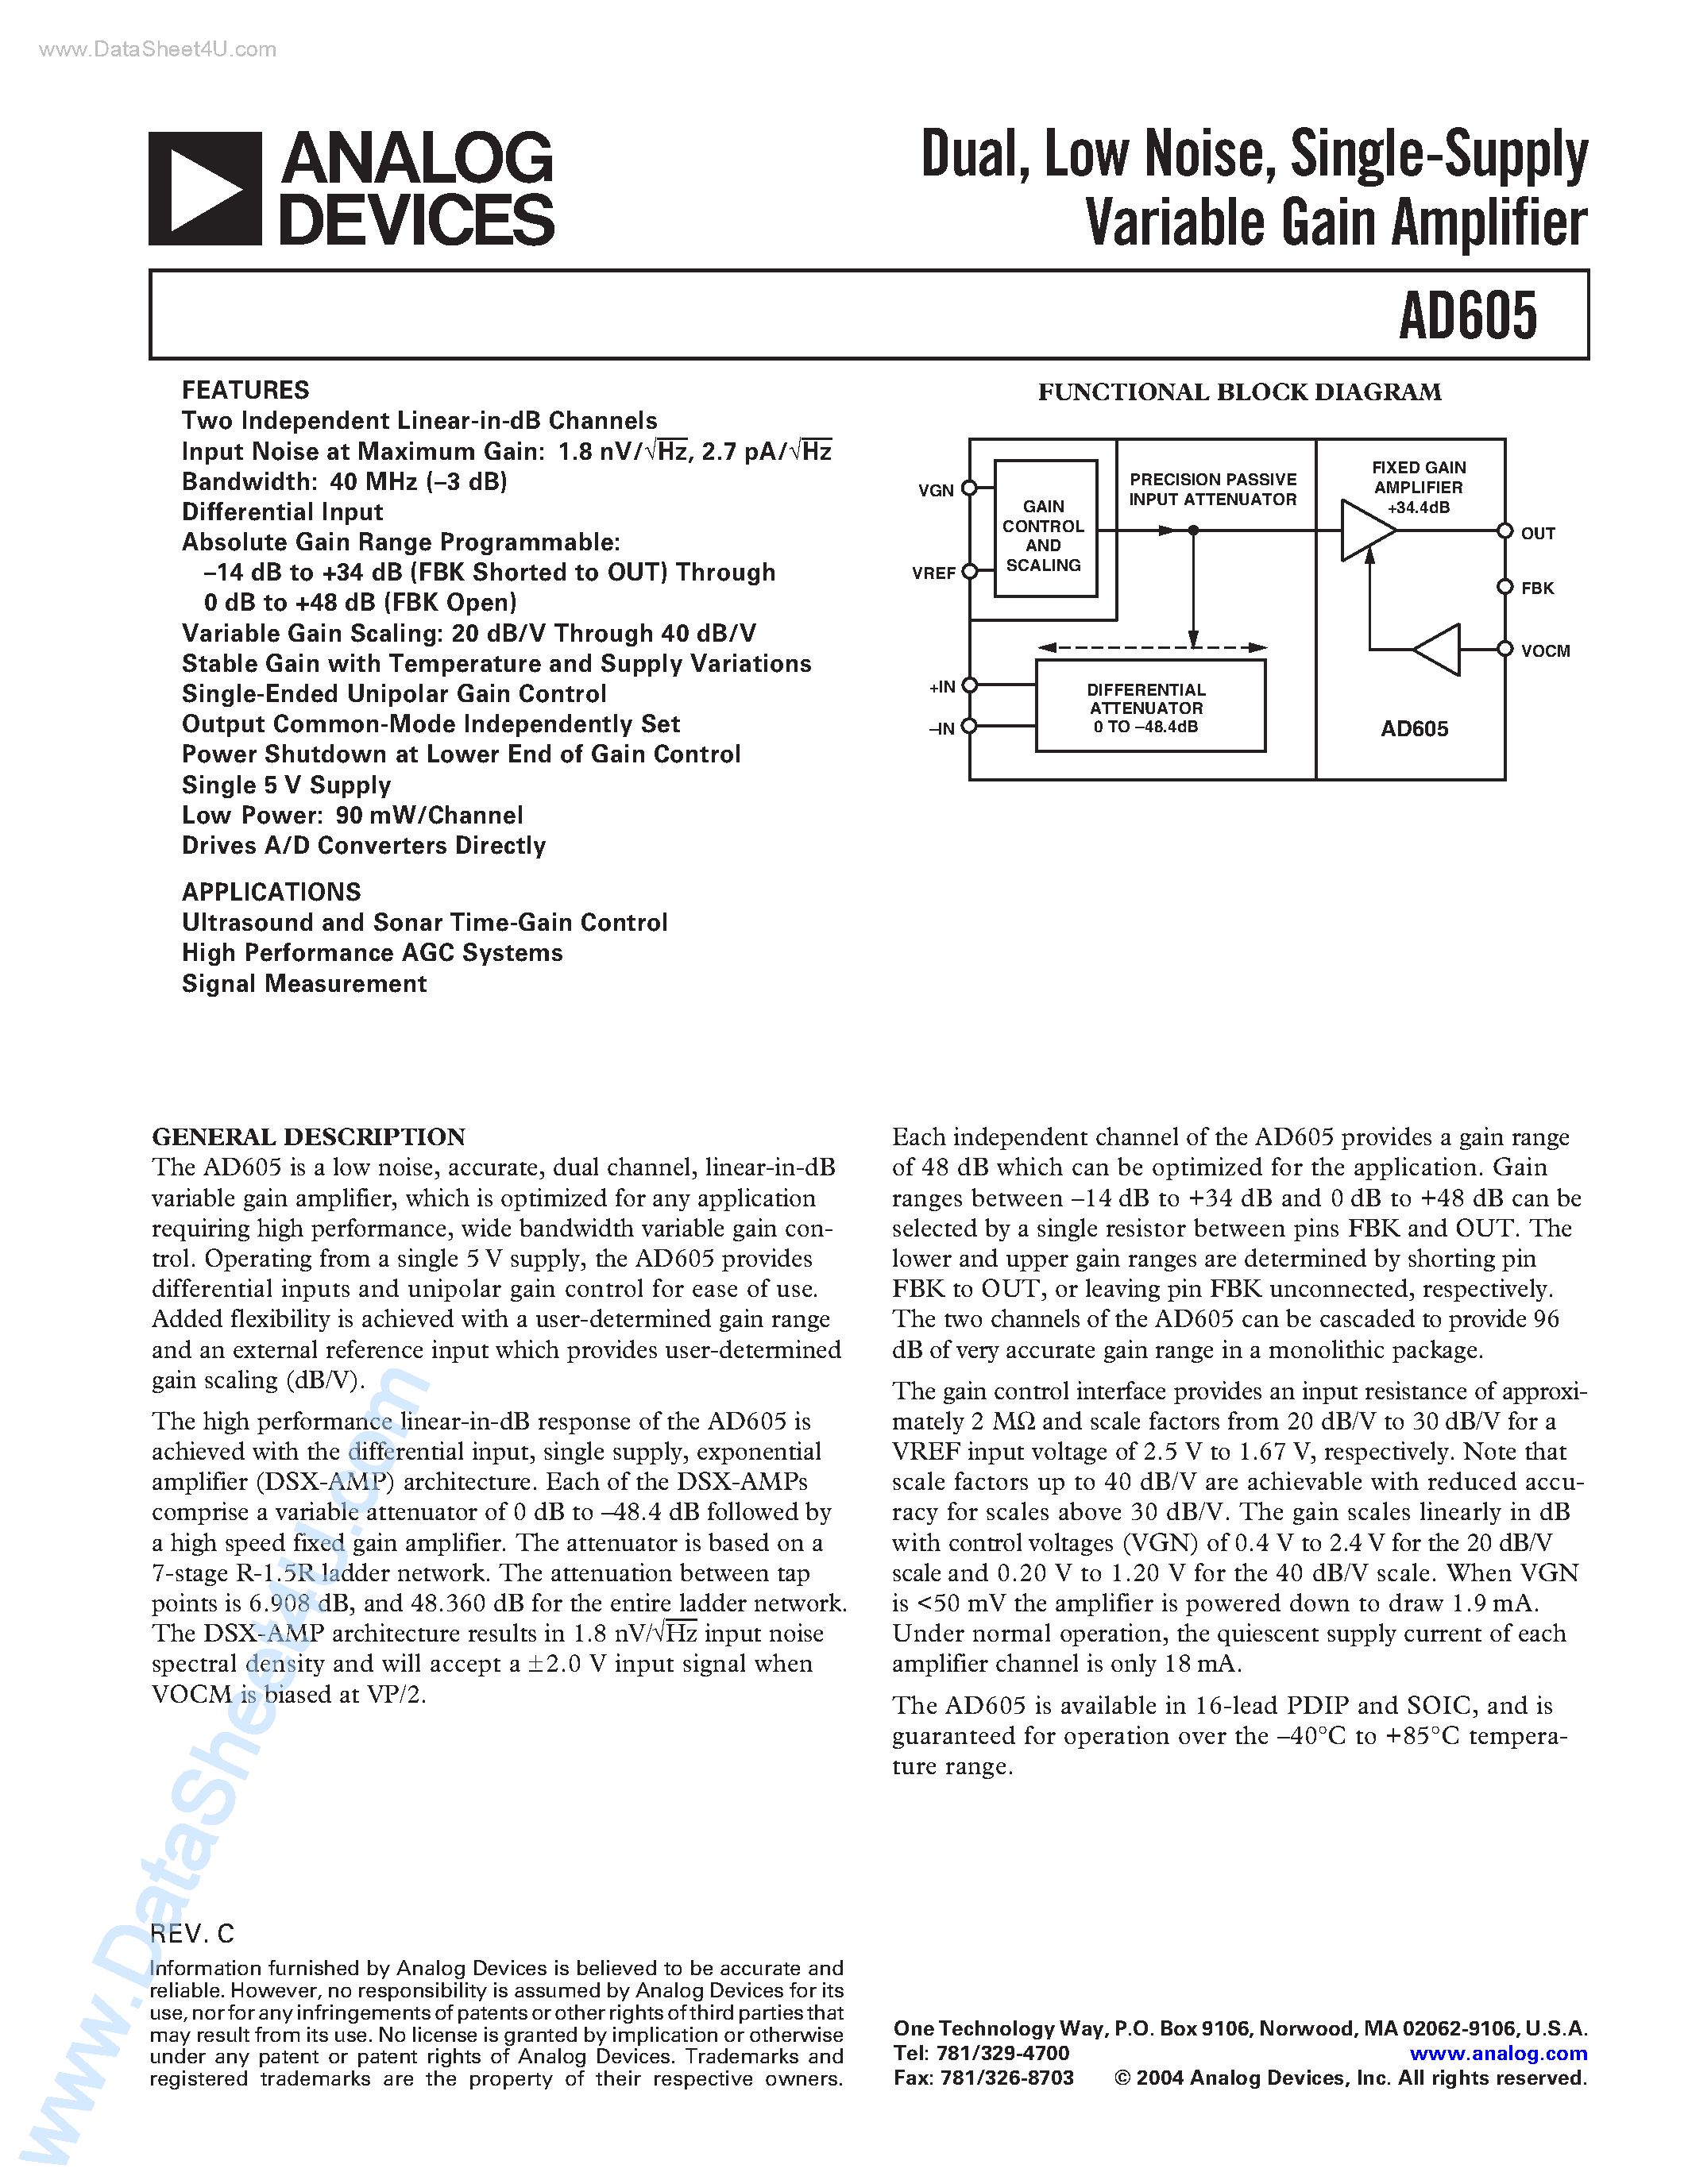 Datasheet AD605AR - Dual/ Low Noise/ Single-Supply Variable Gain Amplifier page 1